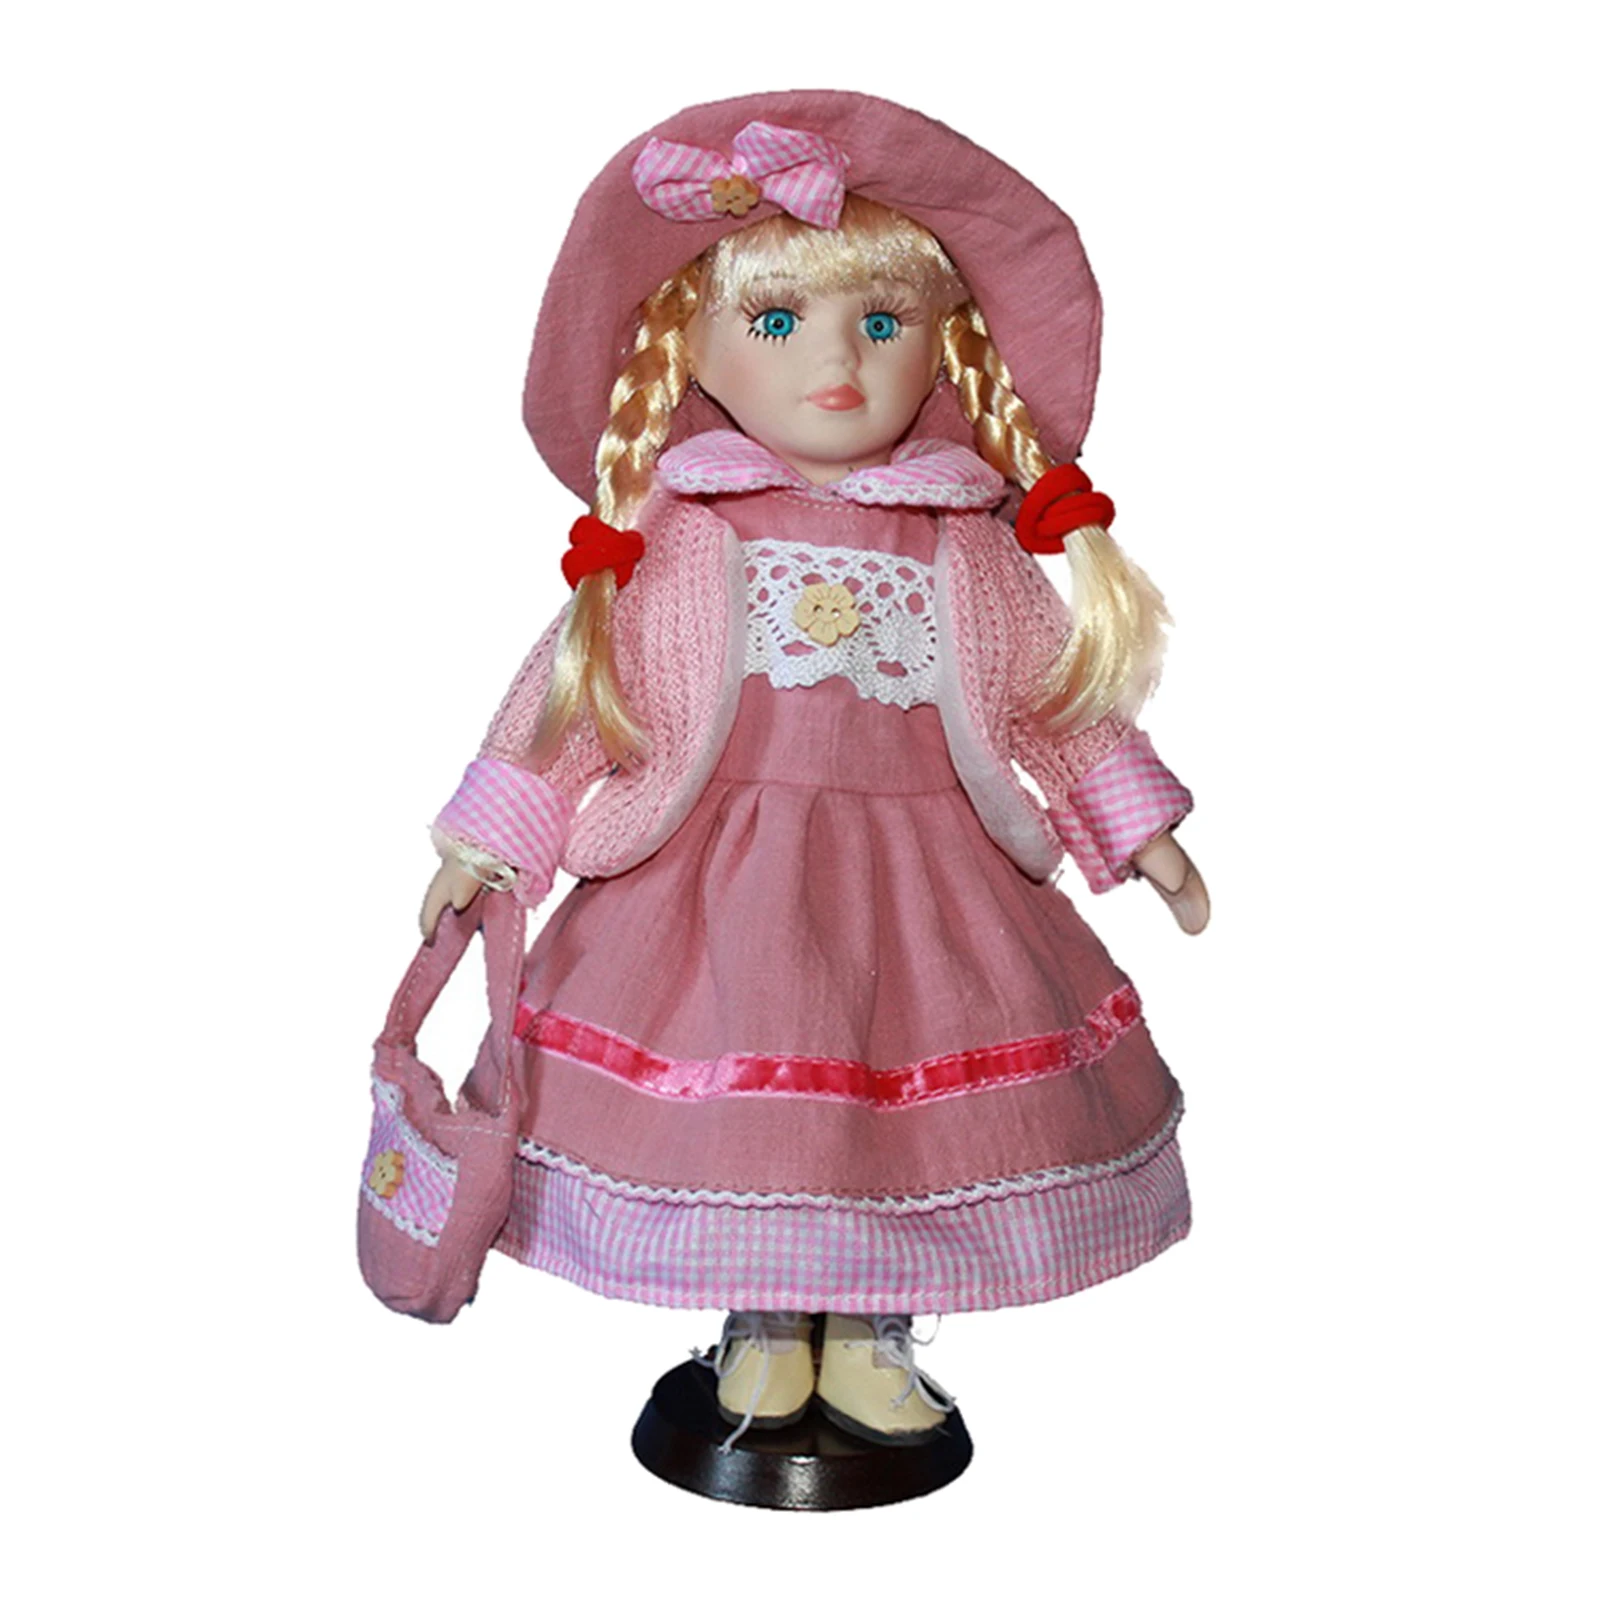 

30cm Lovely Porcelain Girl Doll with Clothes Pink & Stand Home Display Decor Gift Porcelain Baby Figurines Dolls Collectible